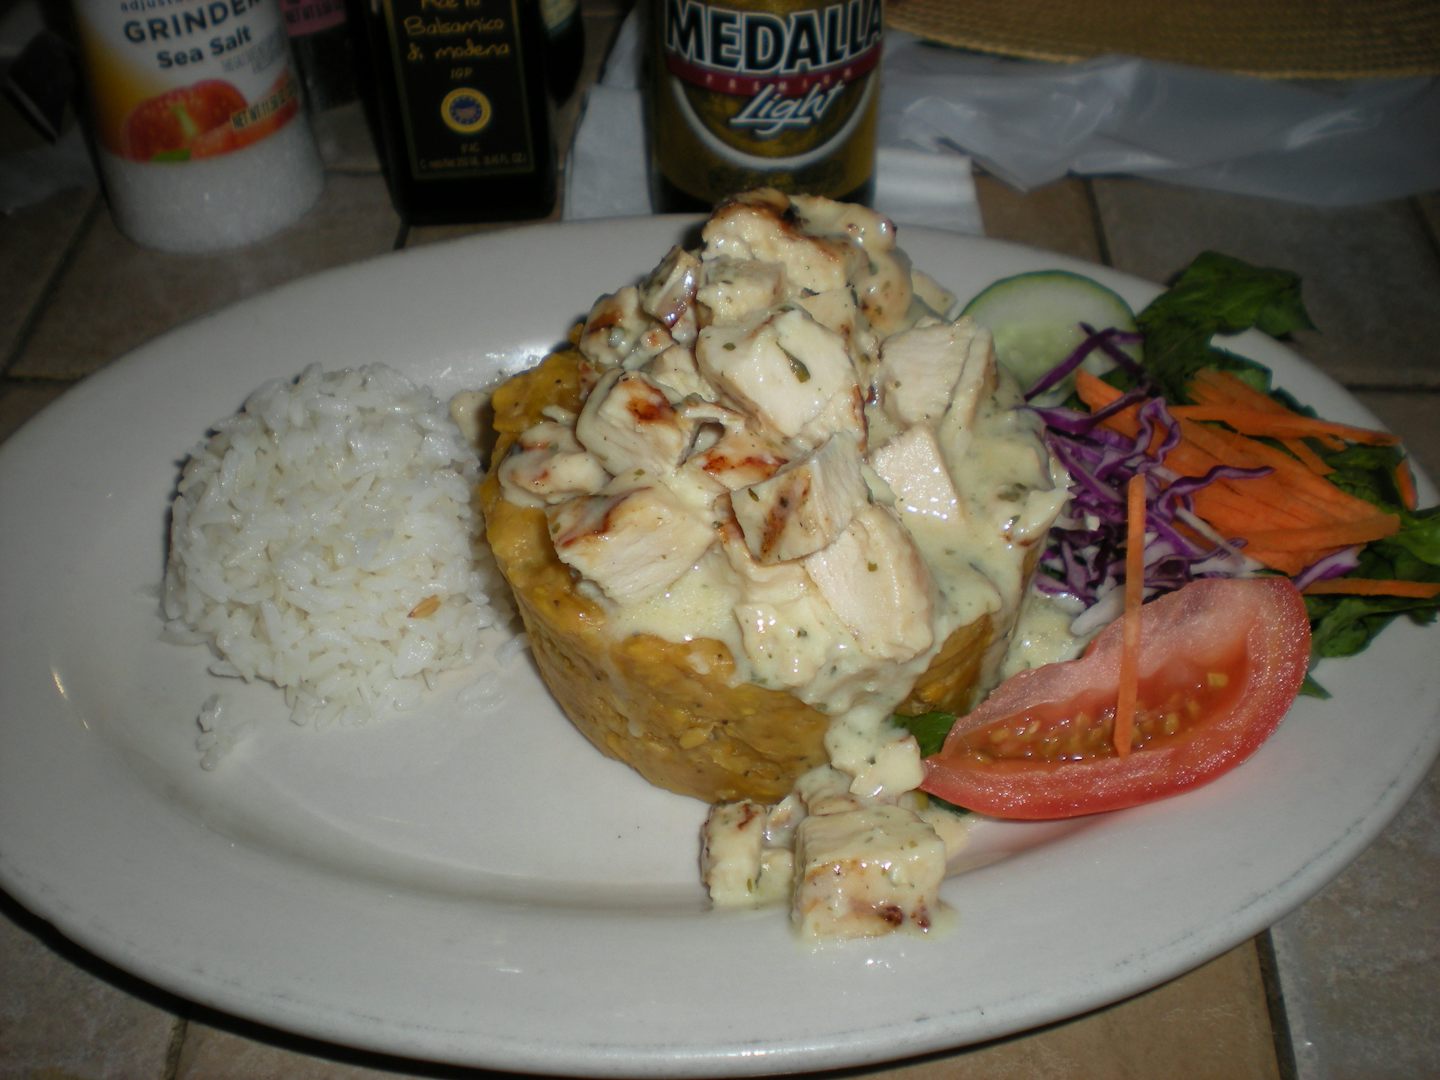 Mofongo for lunch at Old San Juan restaurant.